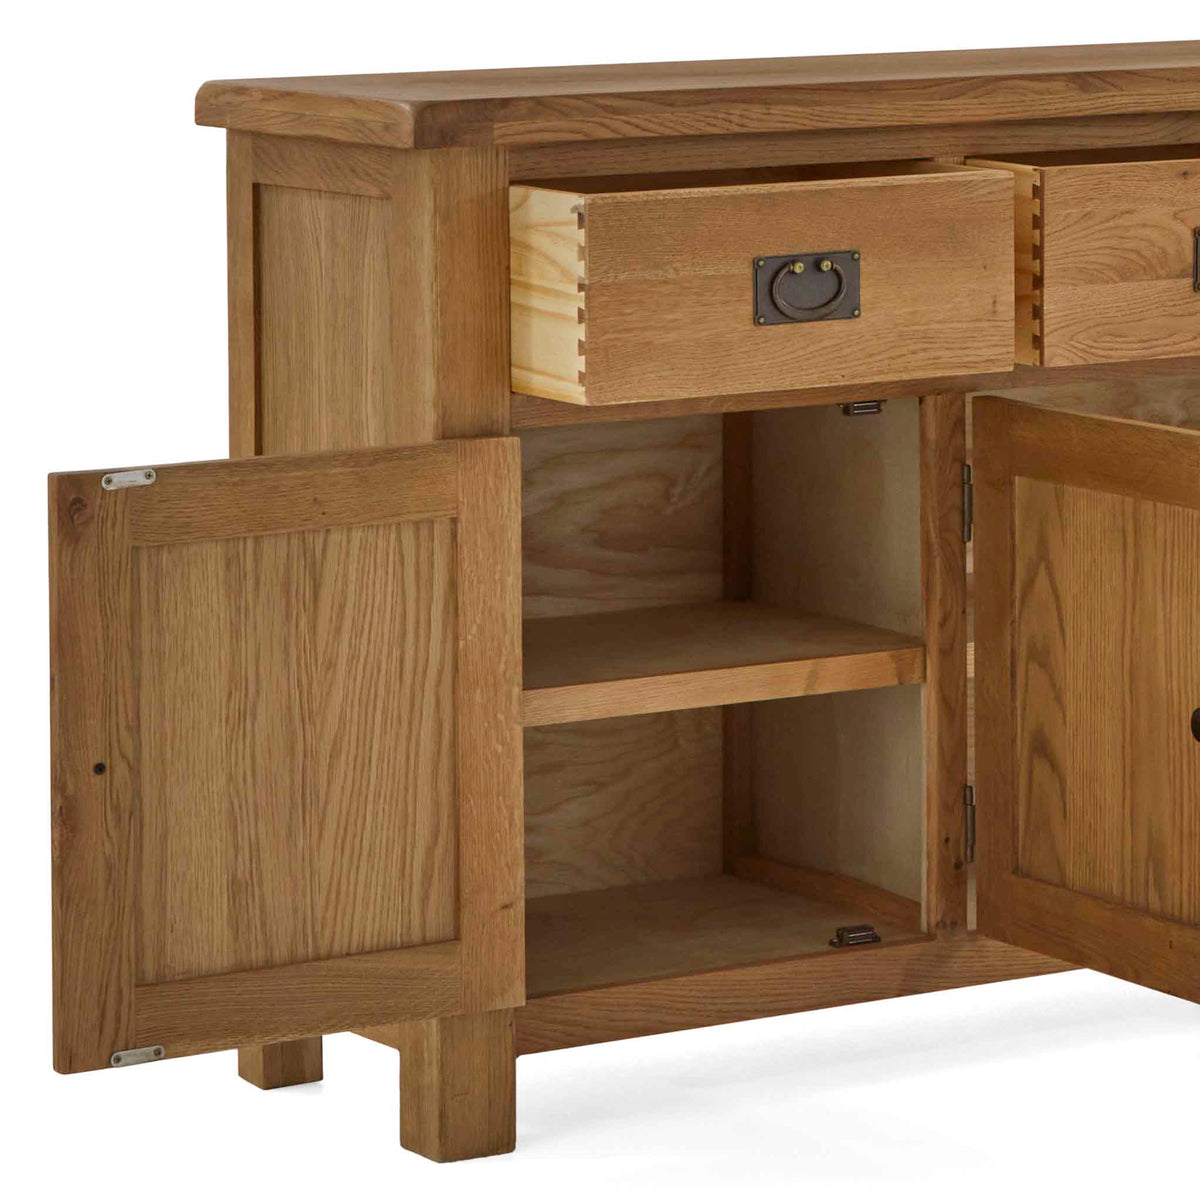 Zelah Oak Extra Large Sideboard - Showing inside cupboard and dovetail joints on drawers